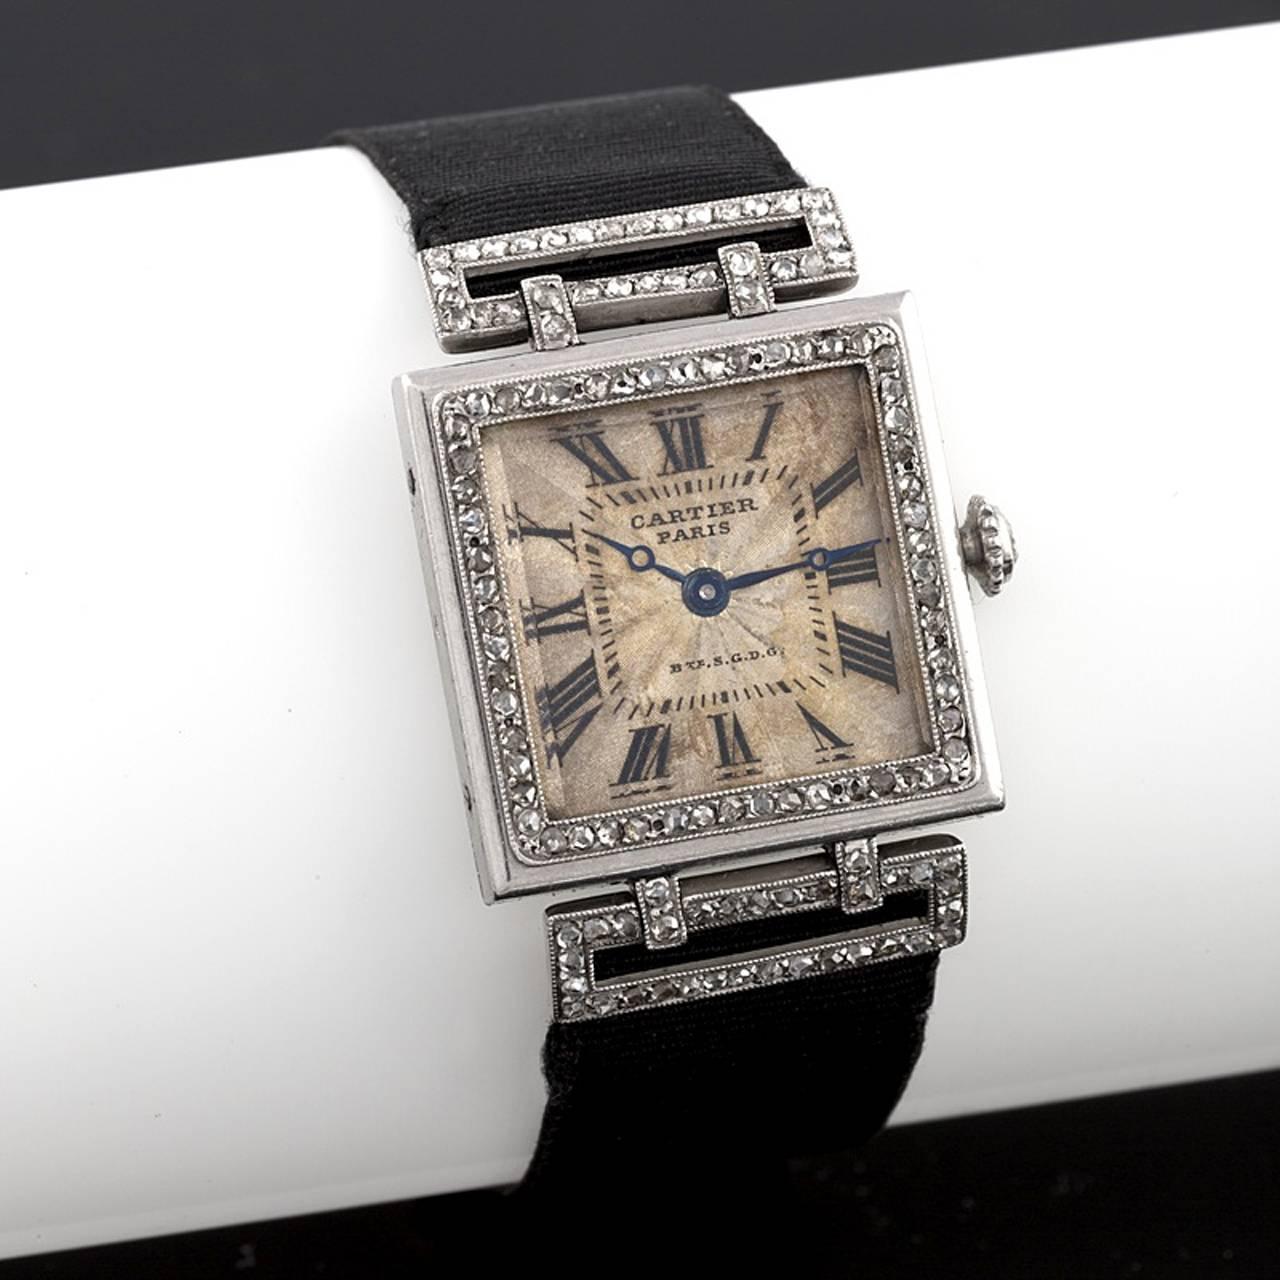 A Cartier Art Deco platinum and 18k gold 'Tank' watch with diamonds. The watch has 117 rose-cut diamonds. The deployant buckle is 18k gold set with diamonds on a silk strap. Dial:  7/8” square. Deployant strap adjustable. Circa 1920. 

Numbered 8165